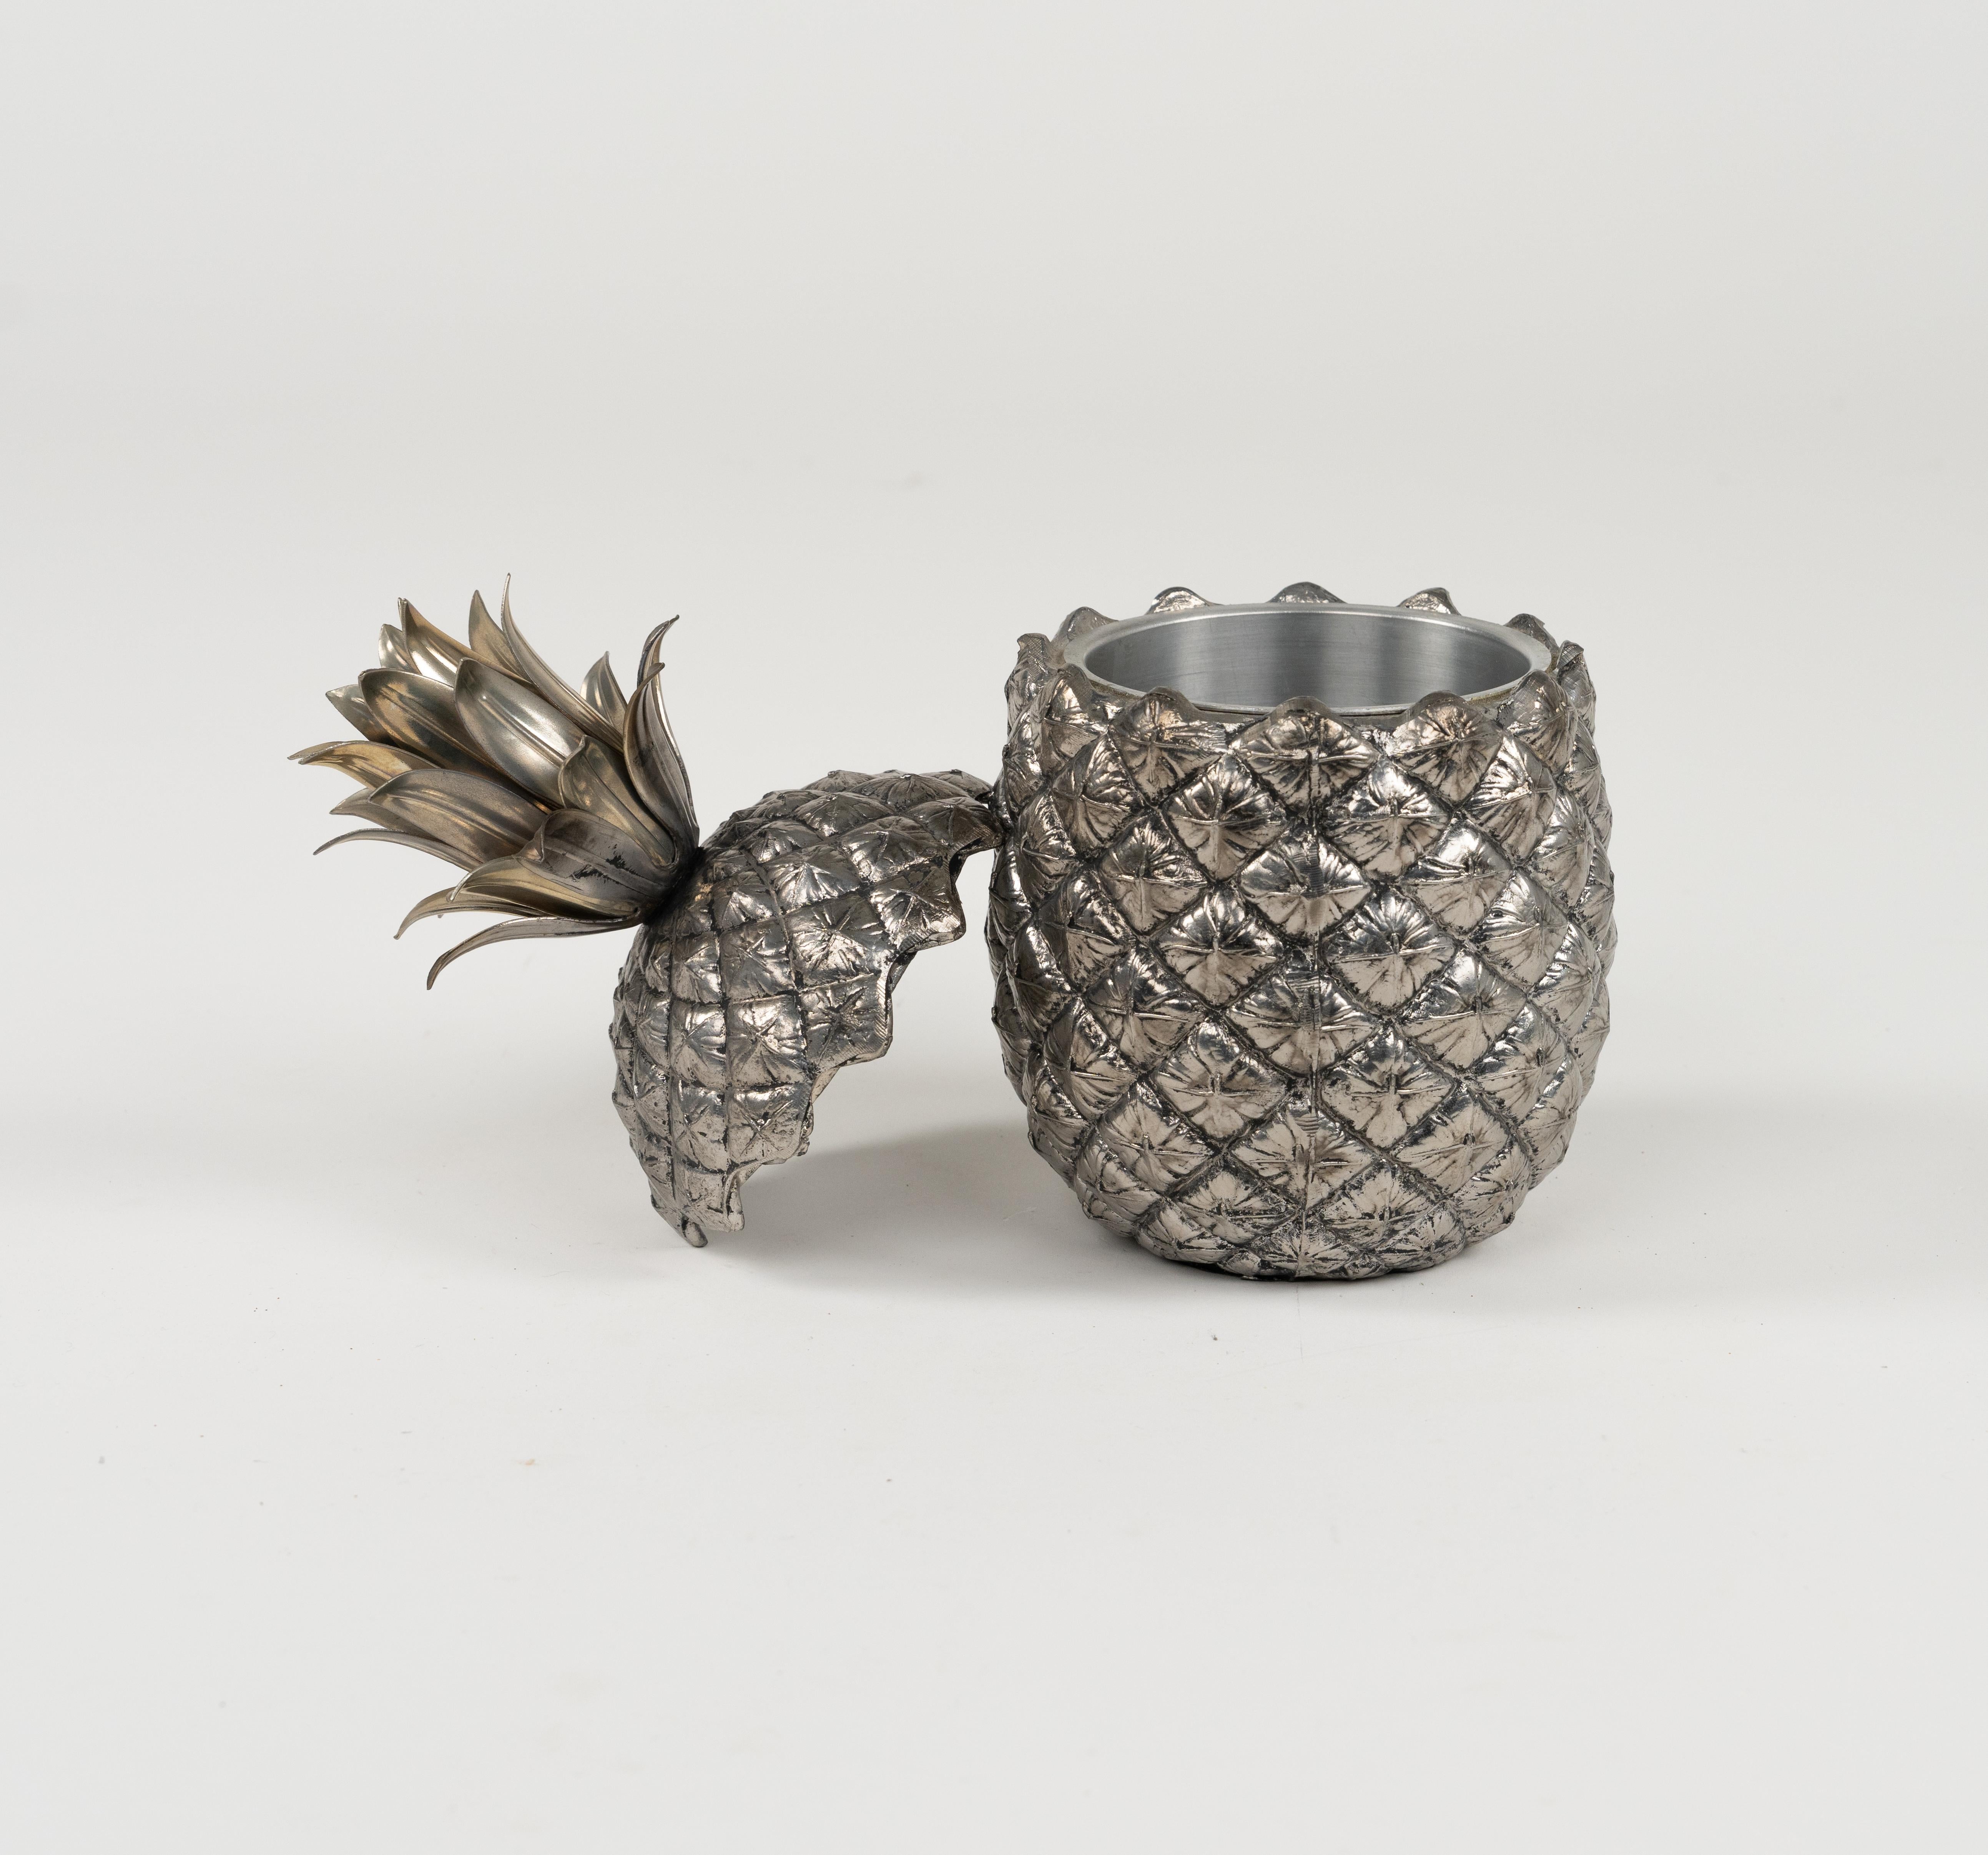 Italian Midcentury Pewter Pineapple Form Ice Bucket by Mauro Manetti Italy, 1960s For Sale